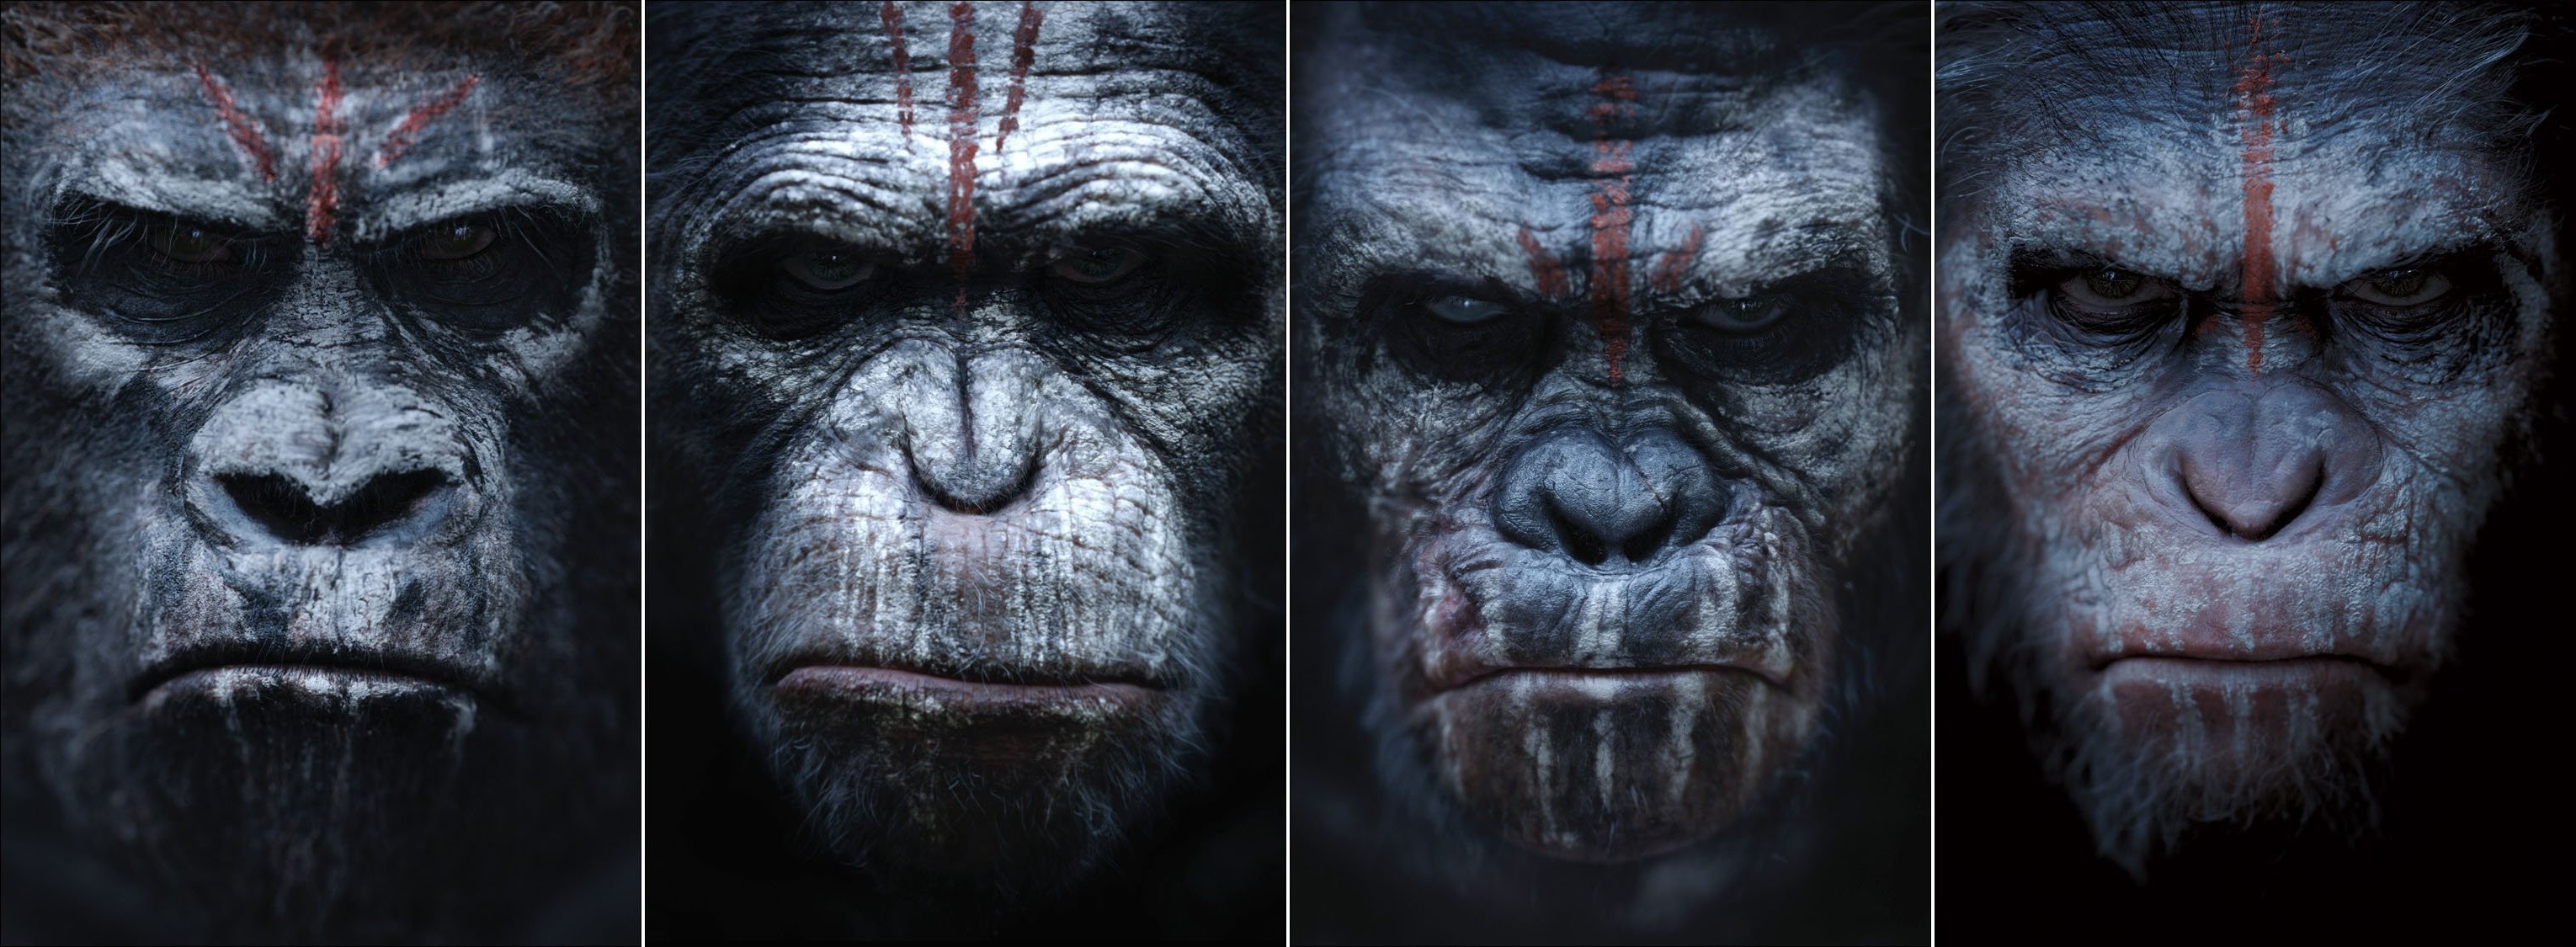 Planet Of The Apes, Dawn Of The Planet Of The Apes, Apes ...